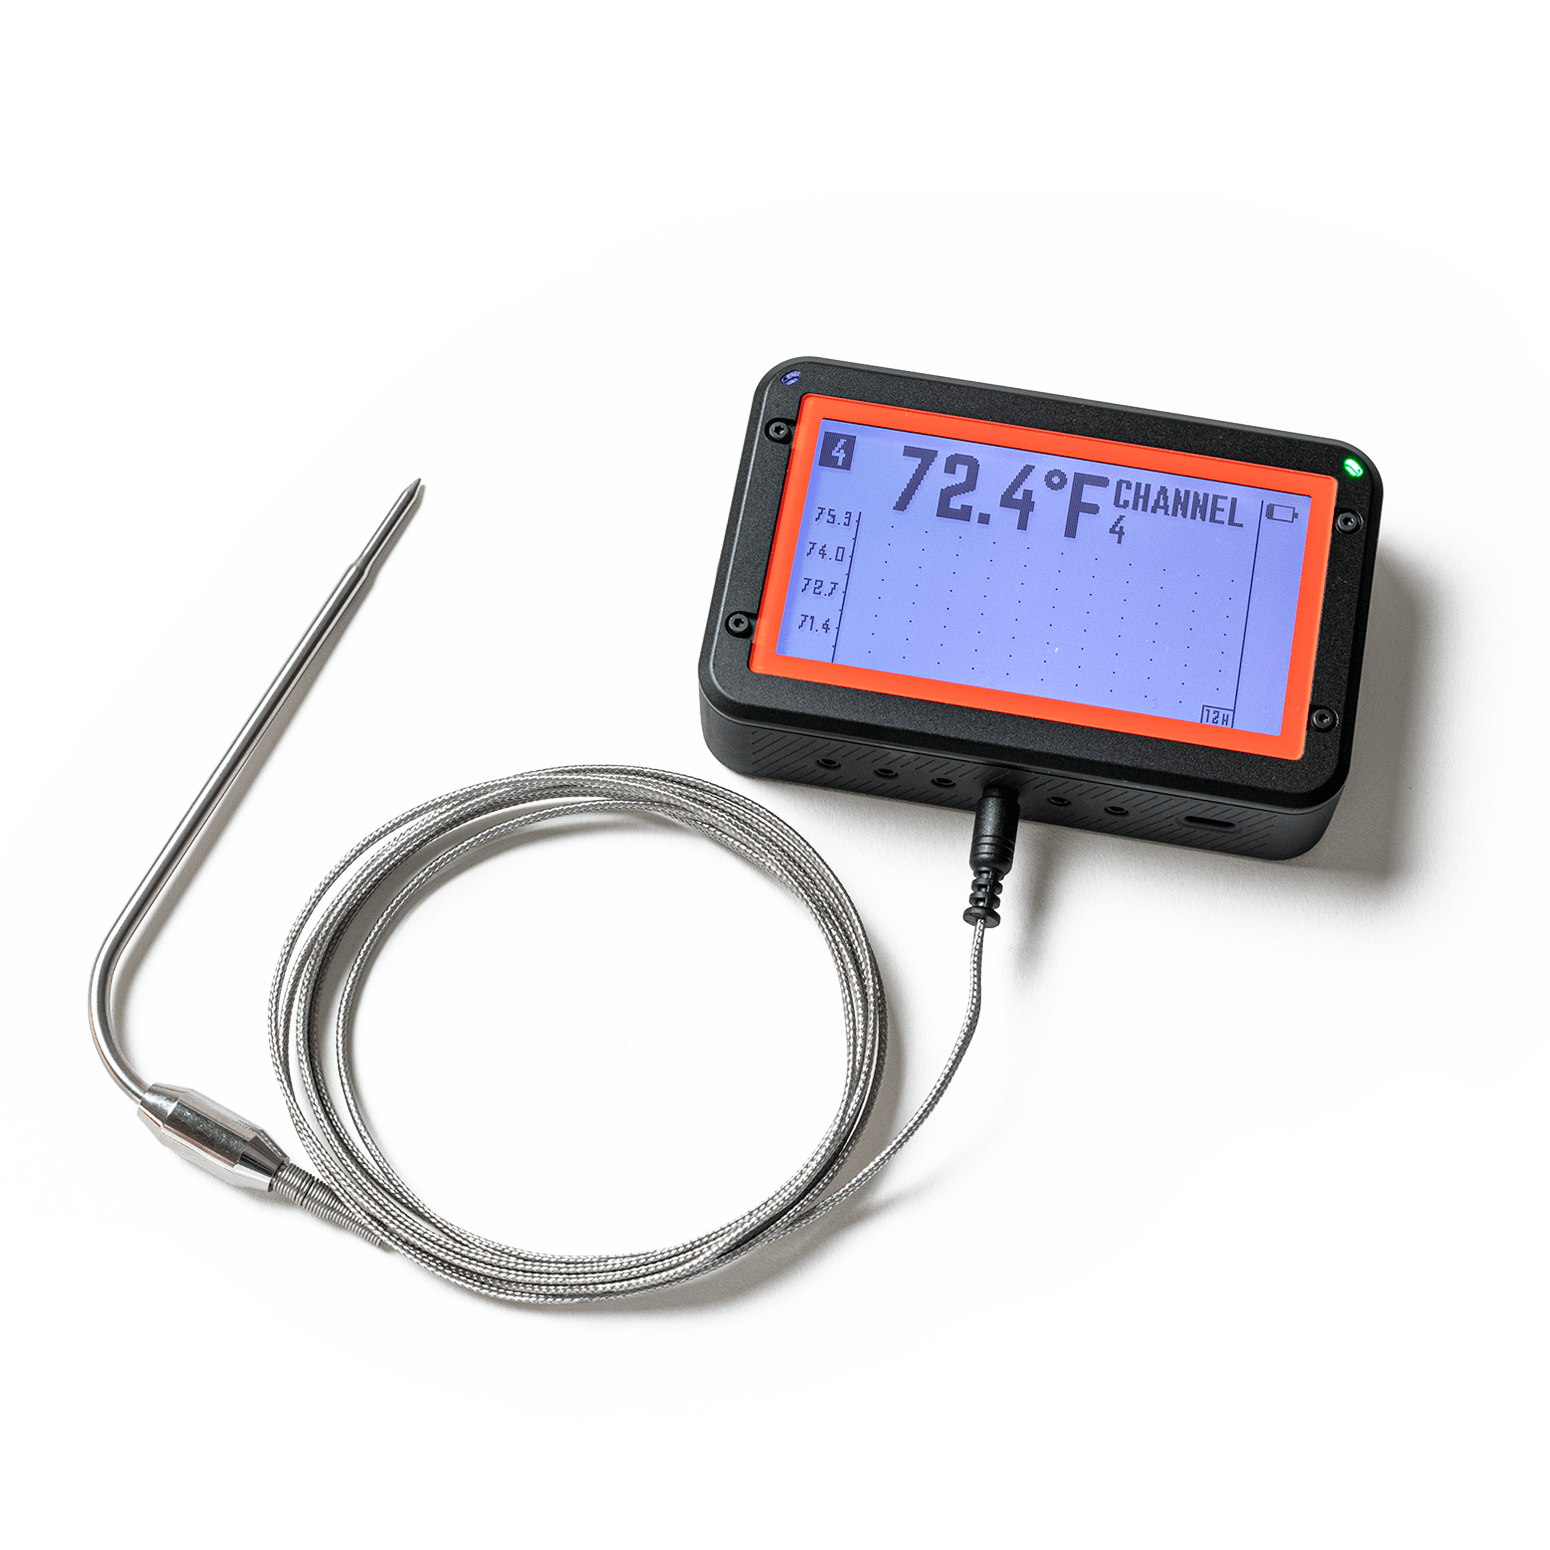 Food Safety Infrared and Probe Cooking Thermometer (INF145) 8:1